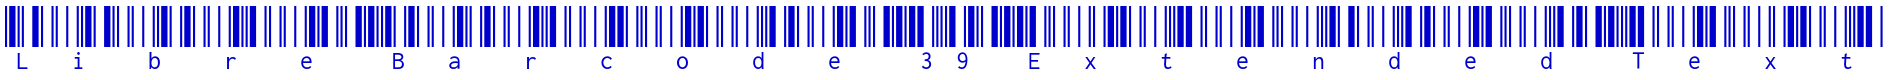 Libre Barcode 39 Extended Text fuente